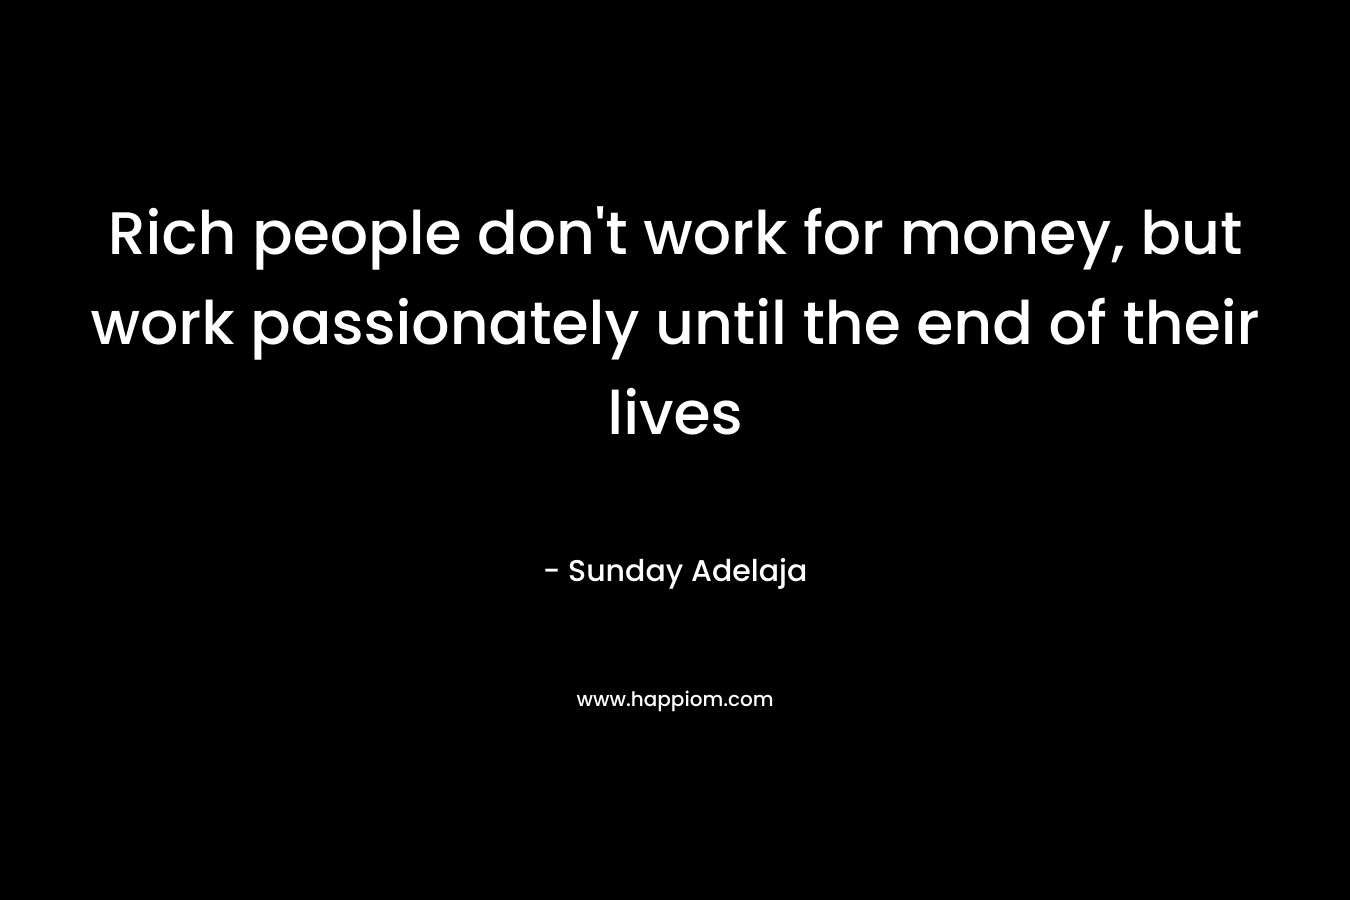 Rich people don't work for money, but work passionately until the end of their lives